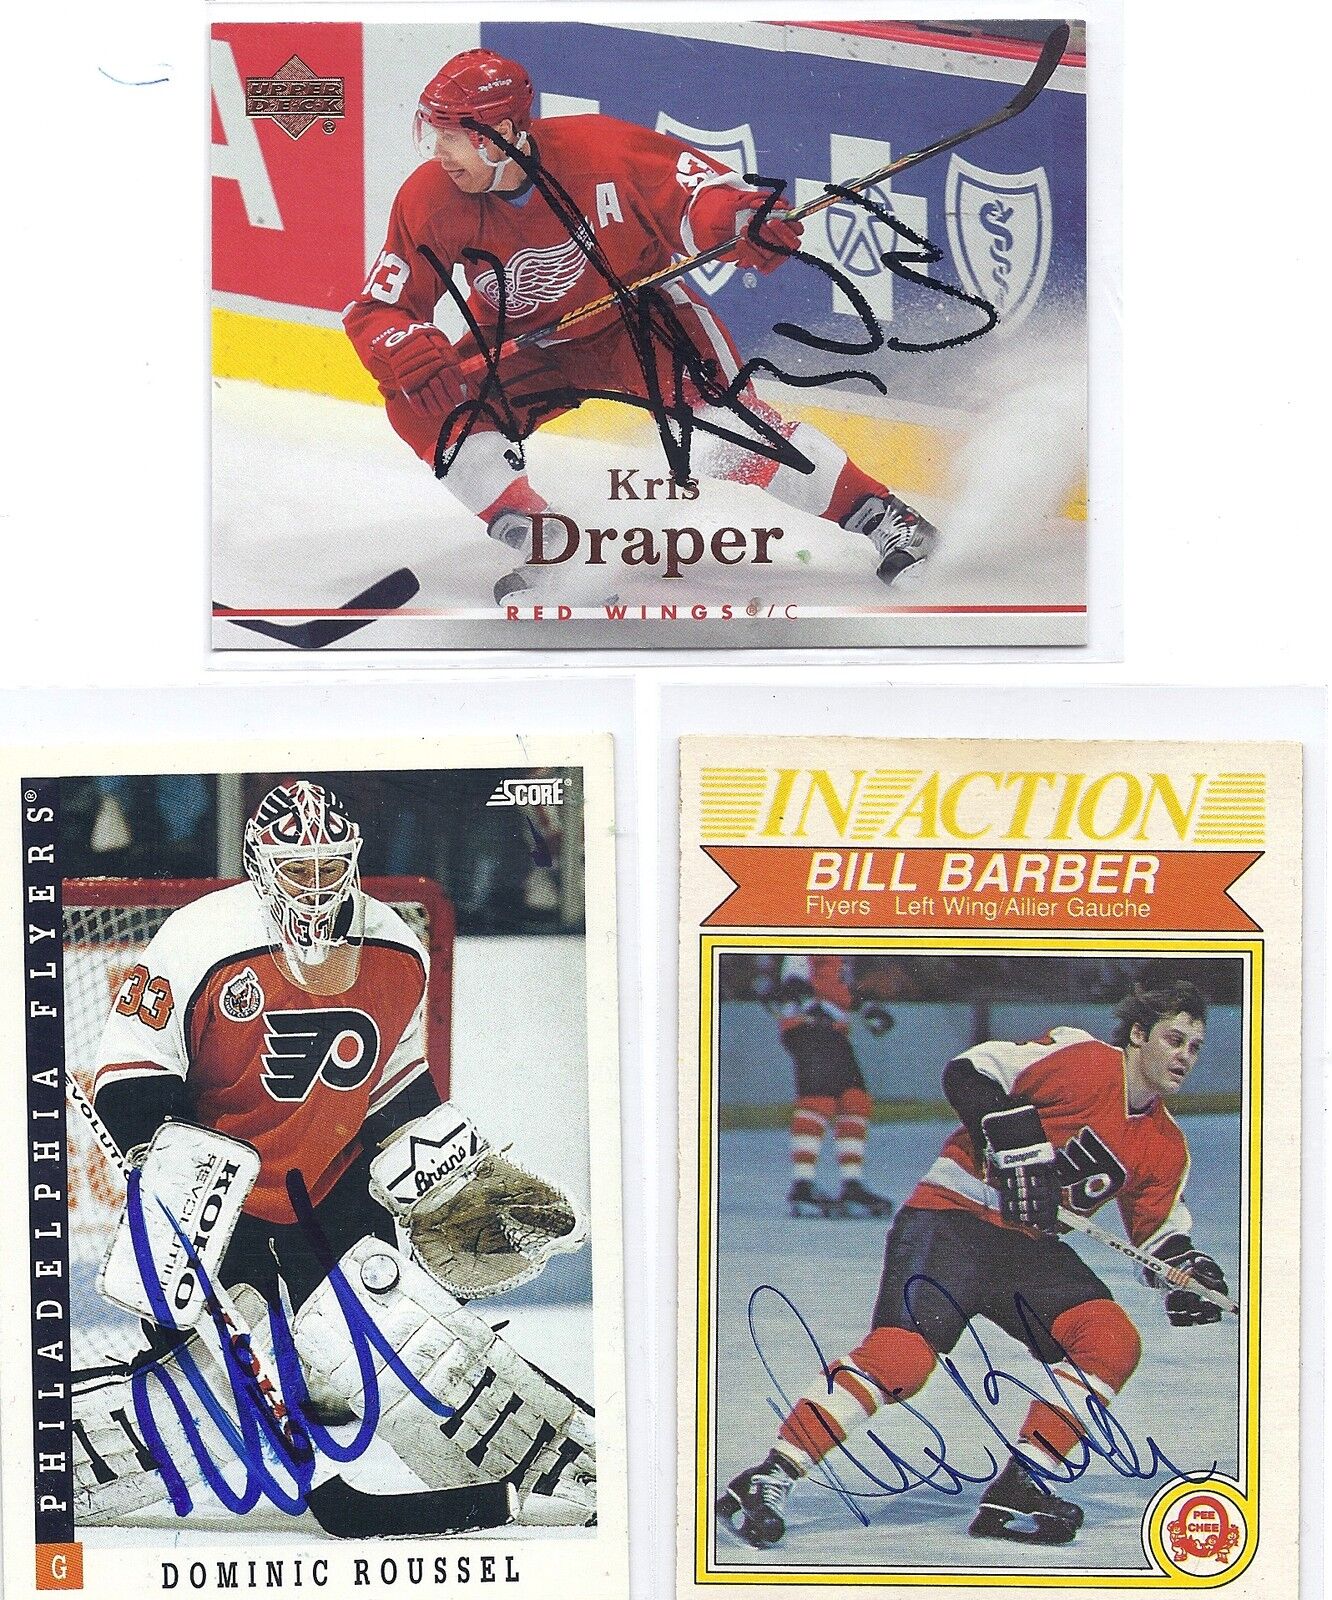 2007-08 UD #3 Kris Draper Signed Autographed Card Detroit Red Wings